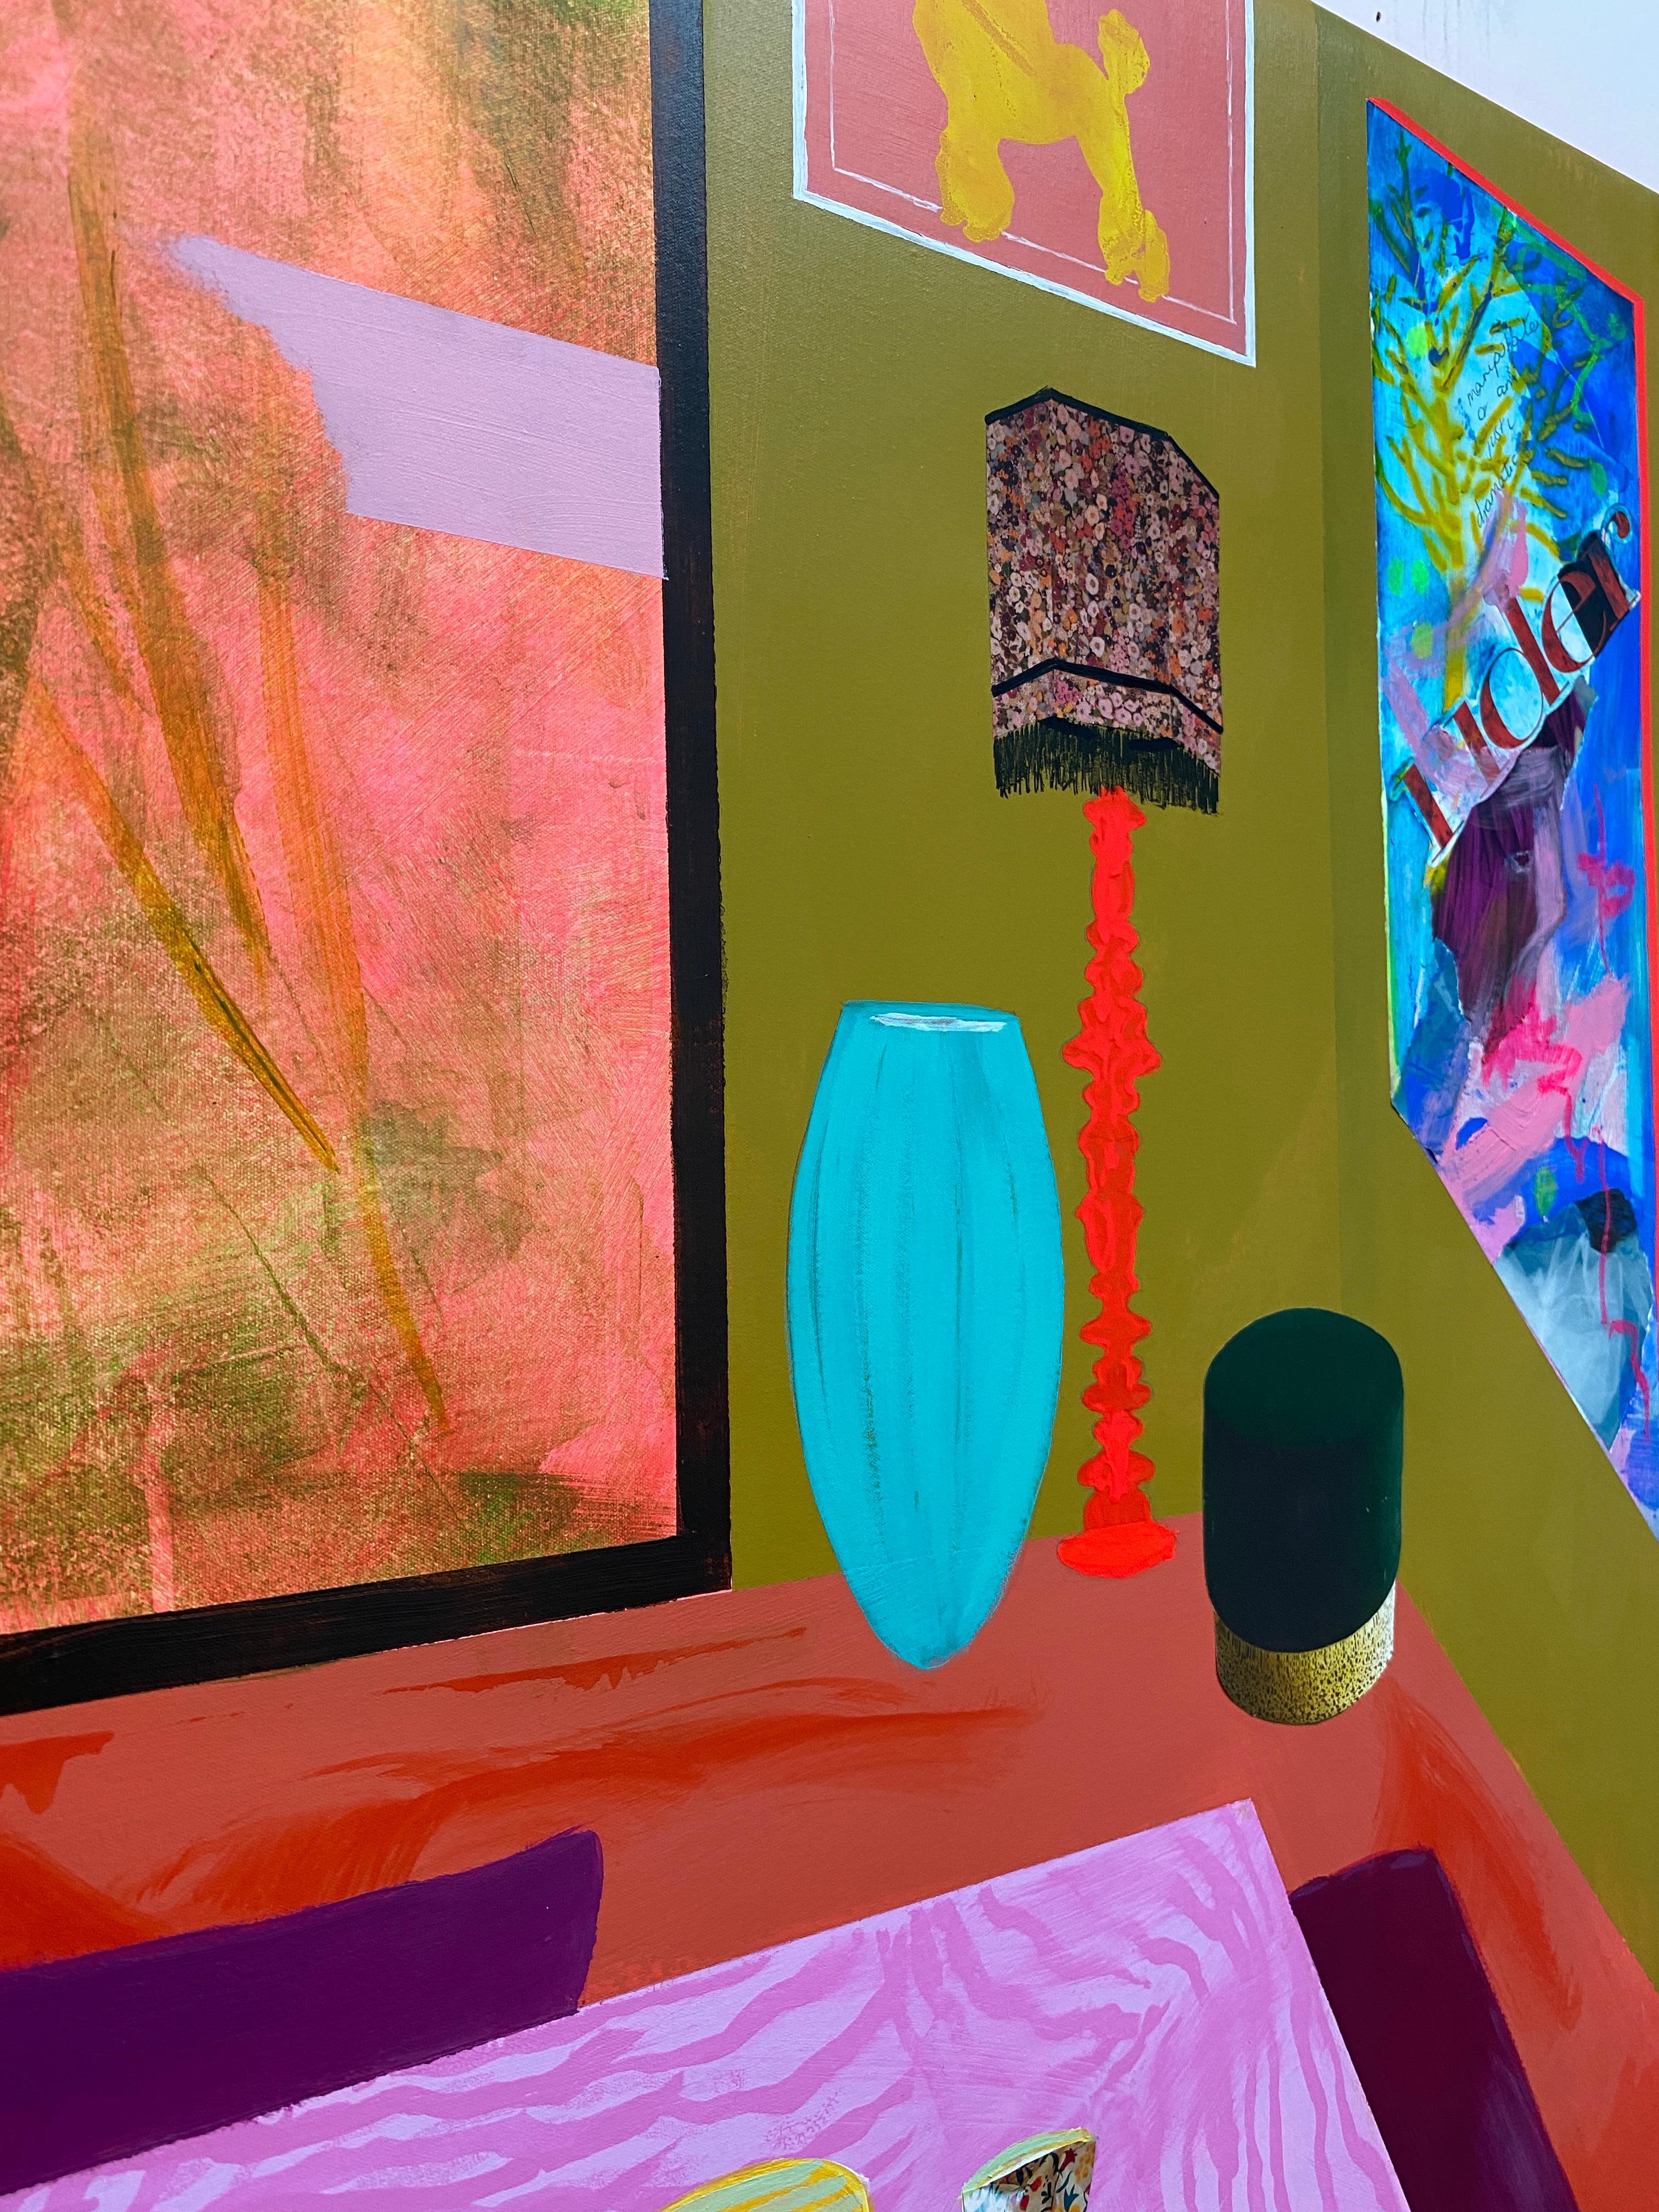 The artworks presented aim to capture the essence and interconnectivity of life, the delicate interplay of form in space and moments captured in time.

Vibrant colours and texture adorn the surfaces of each artists’ compositions. Dawn Beckles’ use